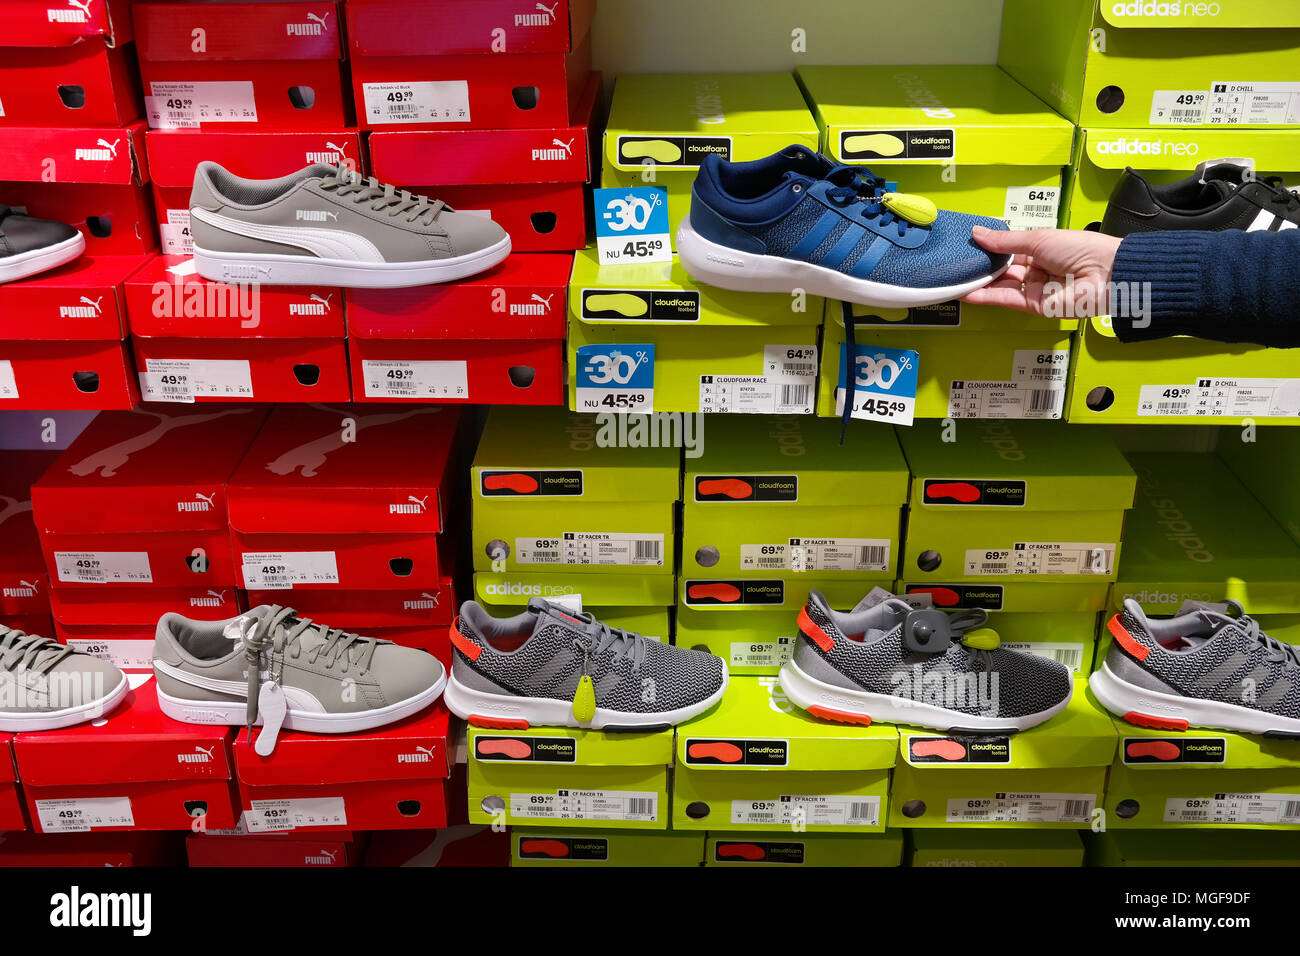 Name Brand Sports Shoes High Resolution Stock Photography And Images Alamy